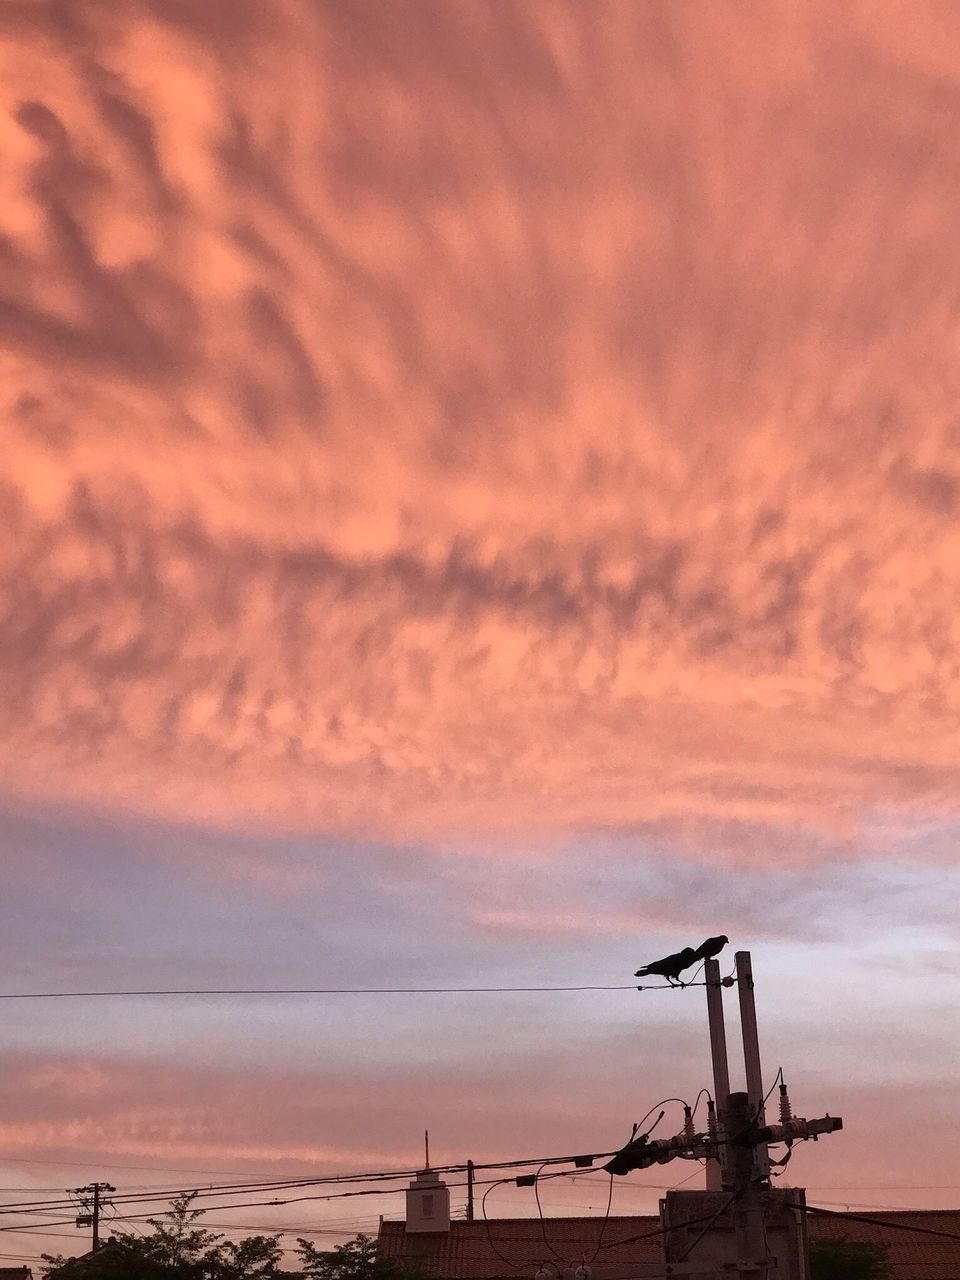 cloud - sky, sunset, sky, industry, machinery, orange color, nature, no people, silhouette, beauty in nature, outdoors, development, construction industry, construction site, crane - construction machinery, equipment, factory, architecture, dramatic sky, built structure, industrial equipment, construction equipment